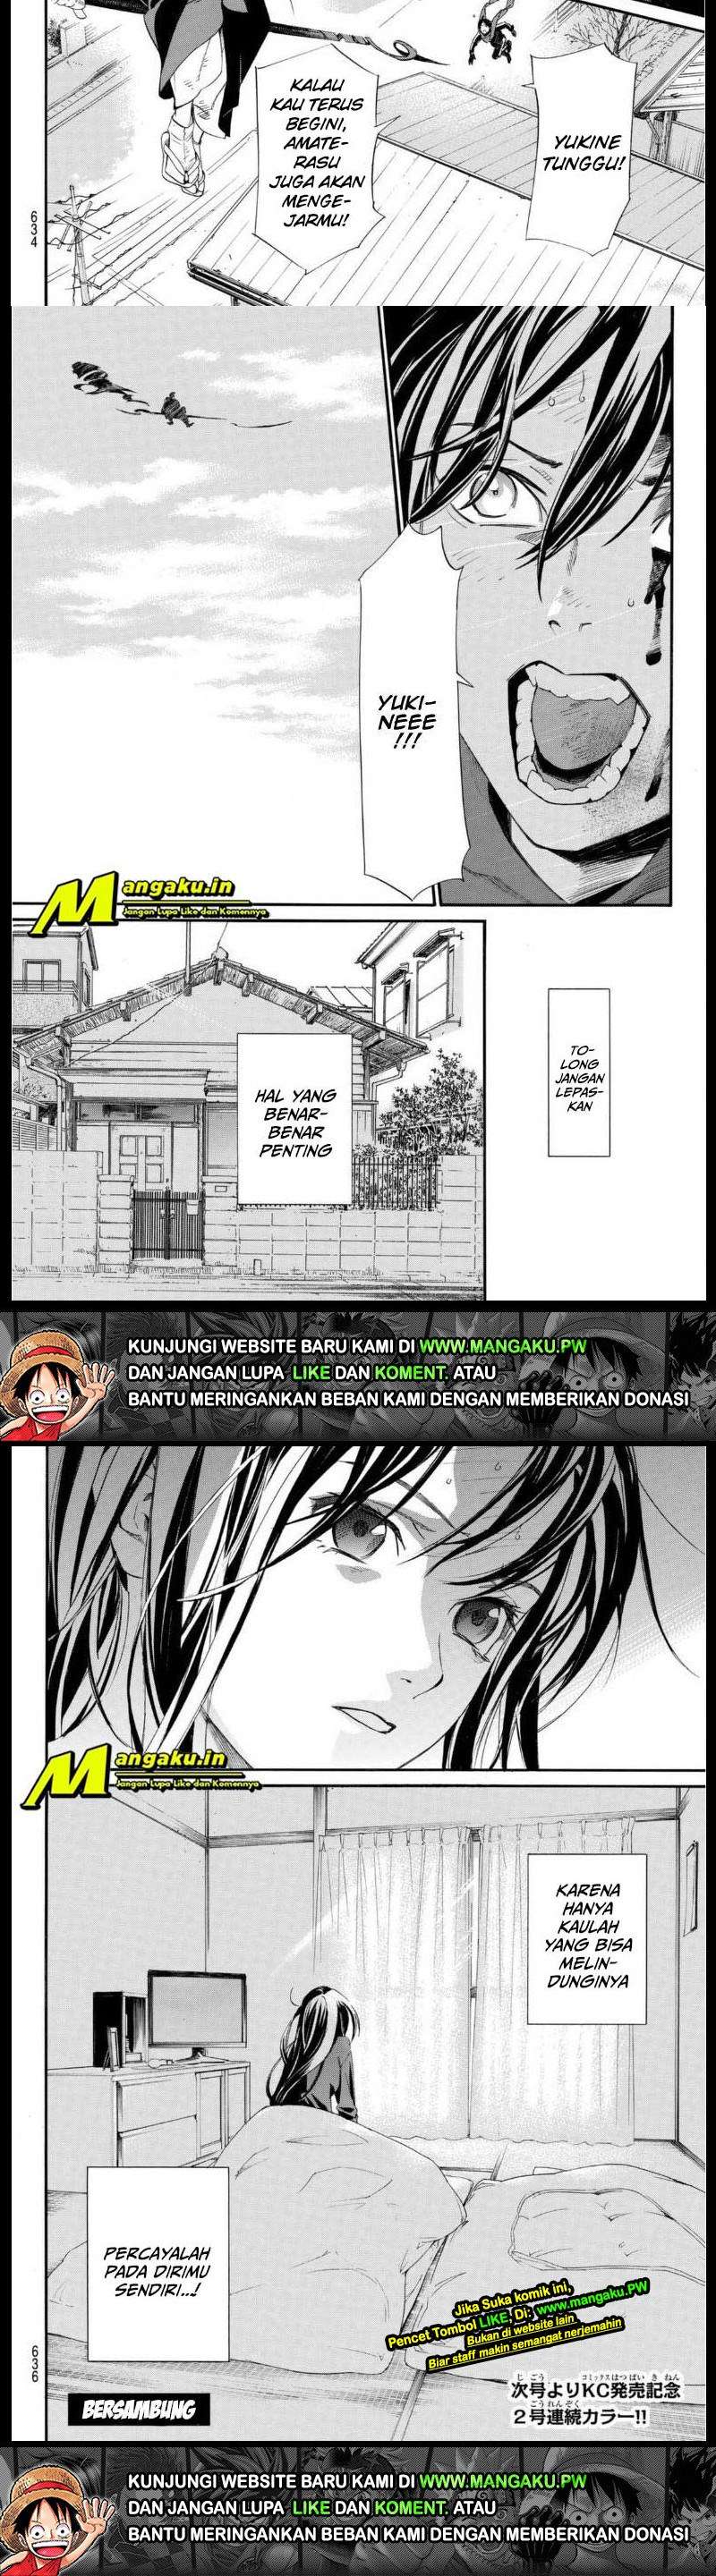 Noragami Chapter 95.2